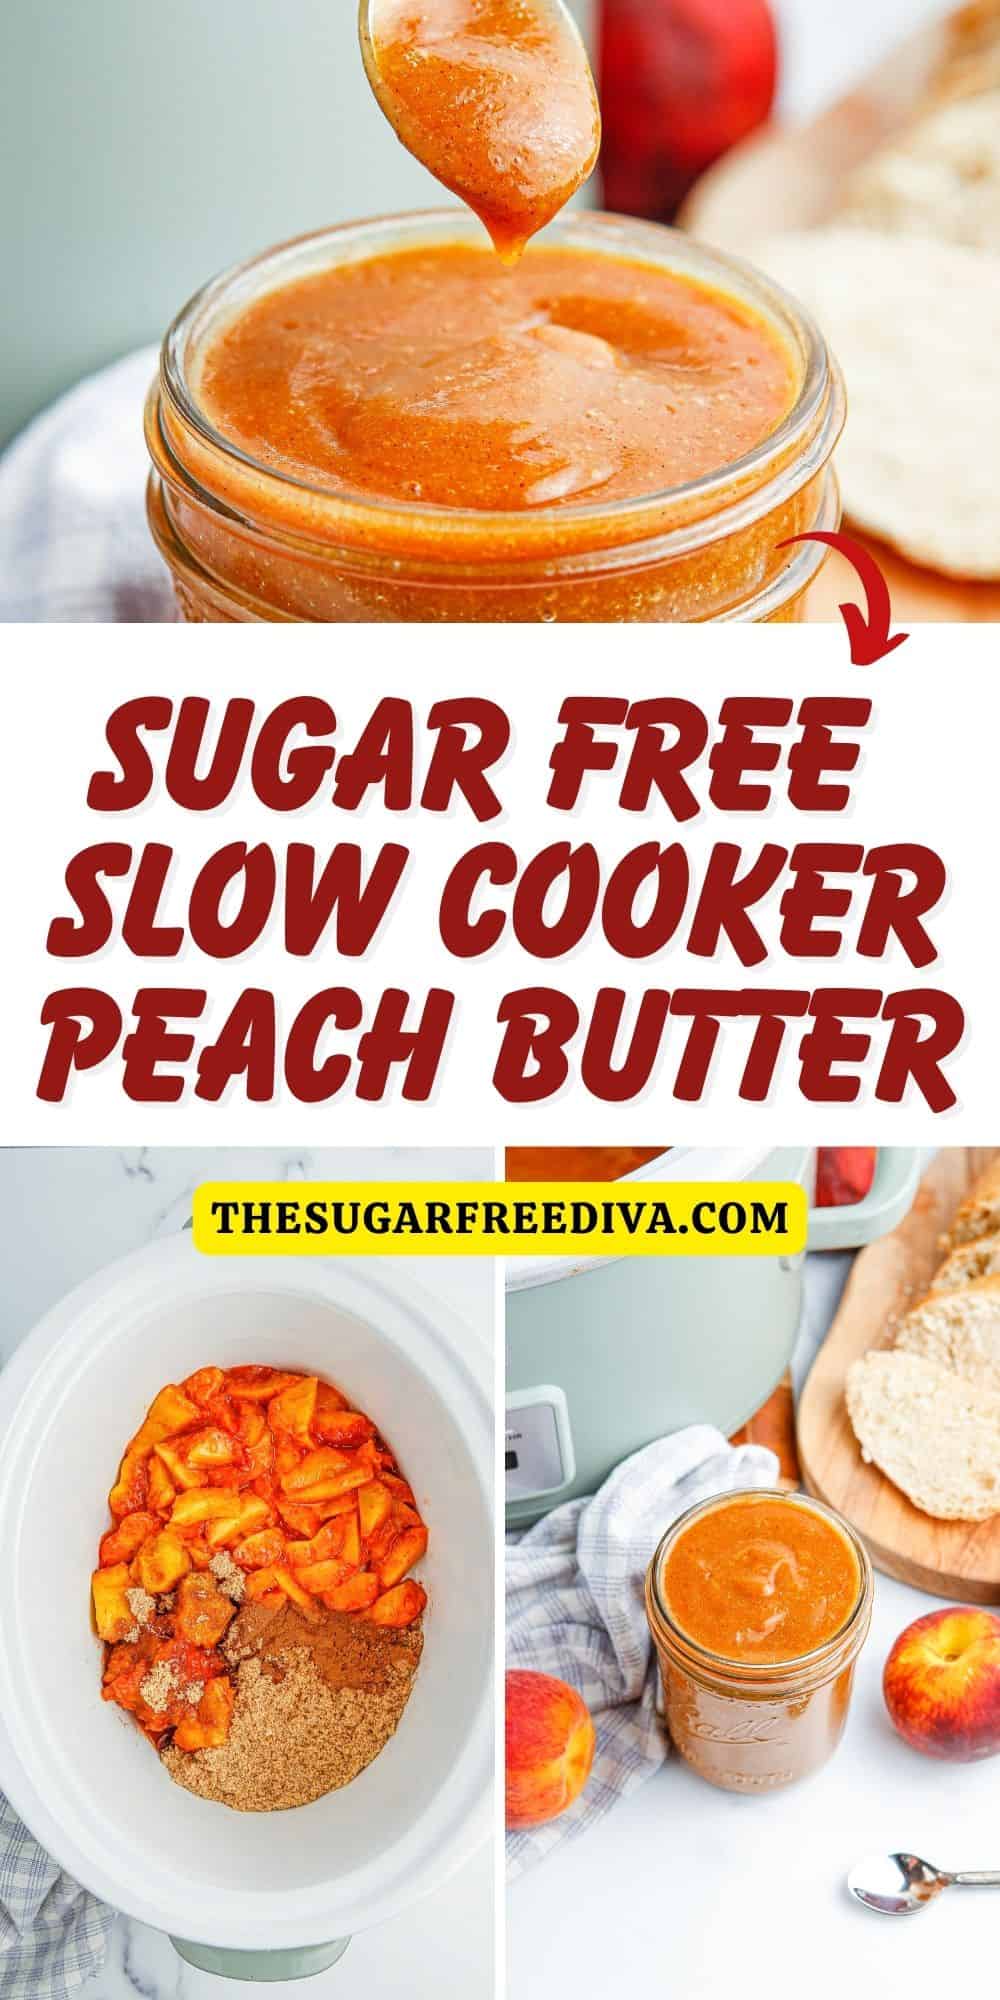 Sugar Free Slow Cooker Peach Butter, a simple recipe for making homemade peach butter spread without adding sugar.